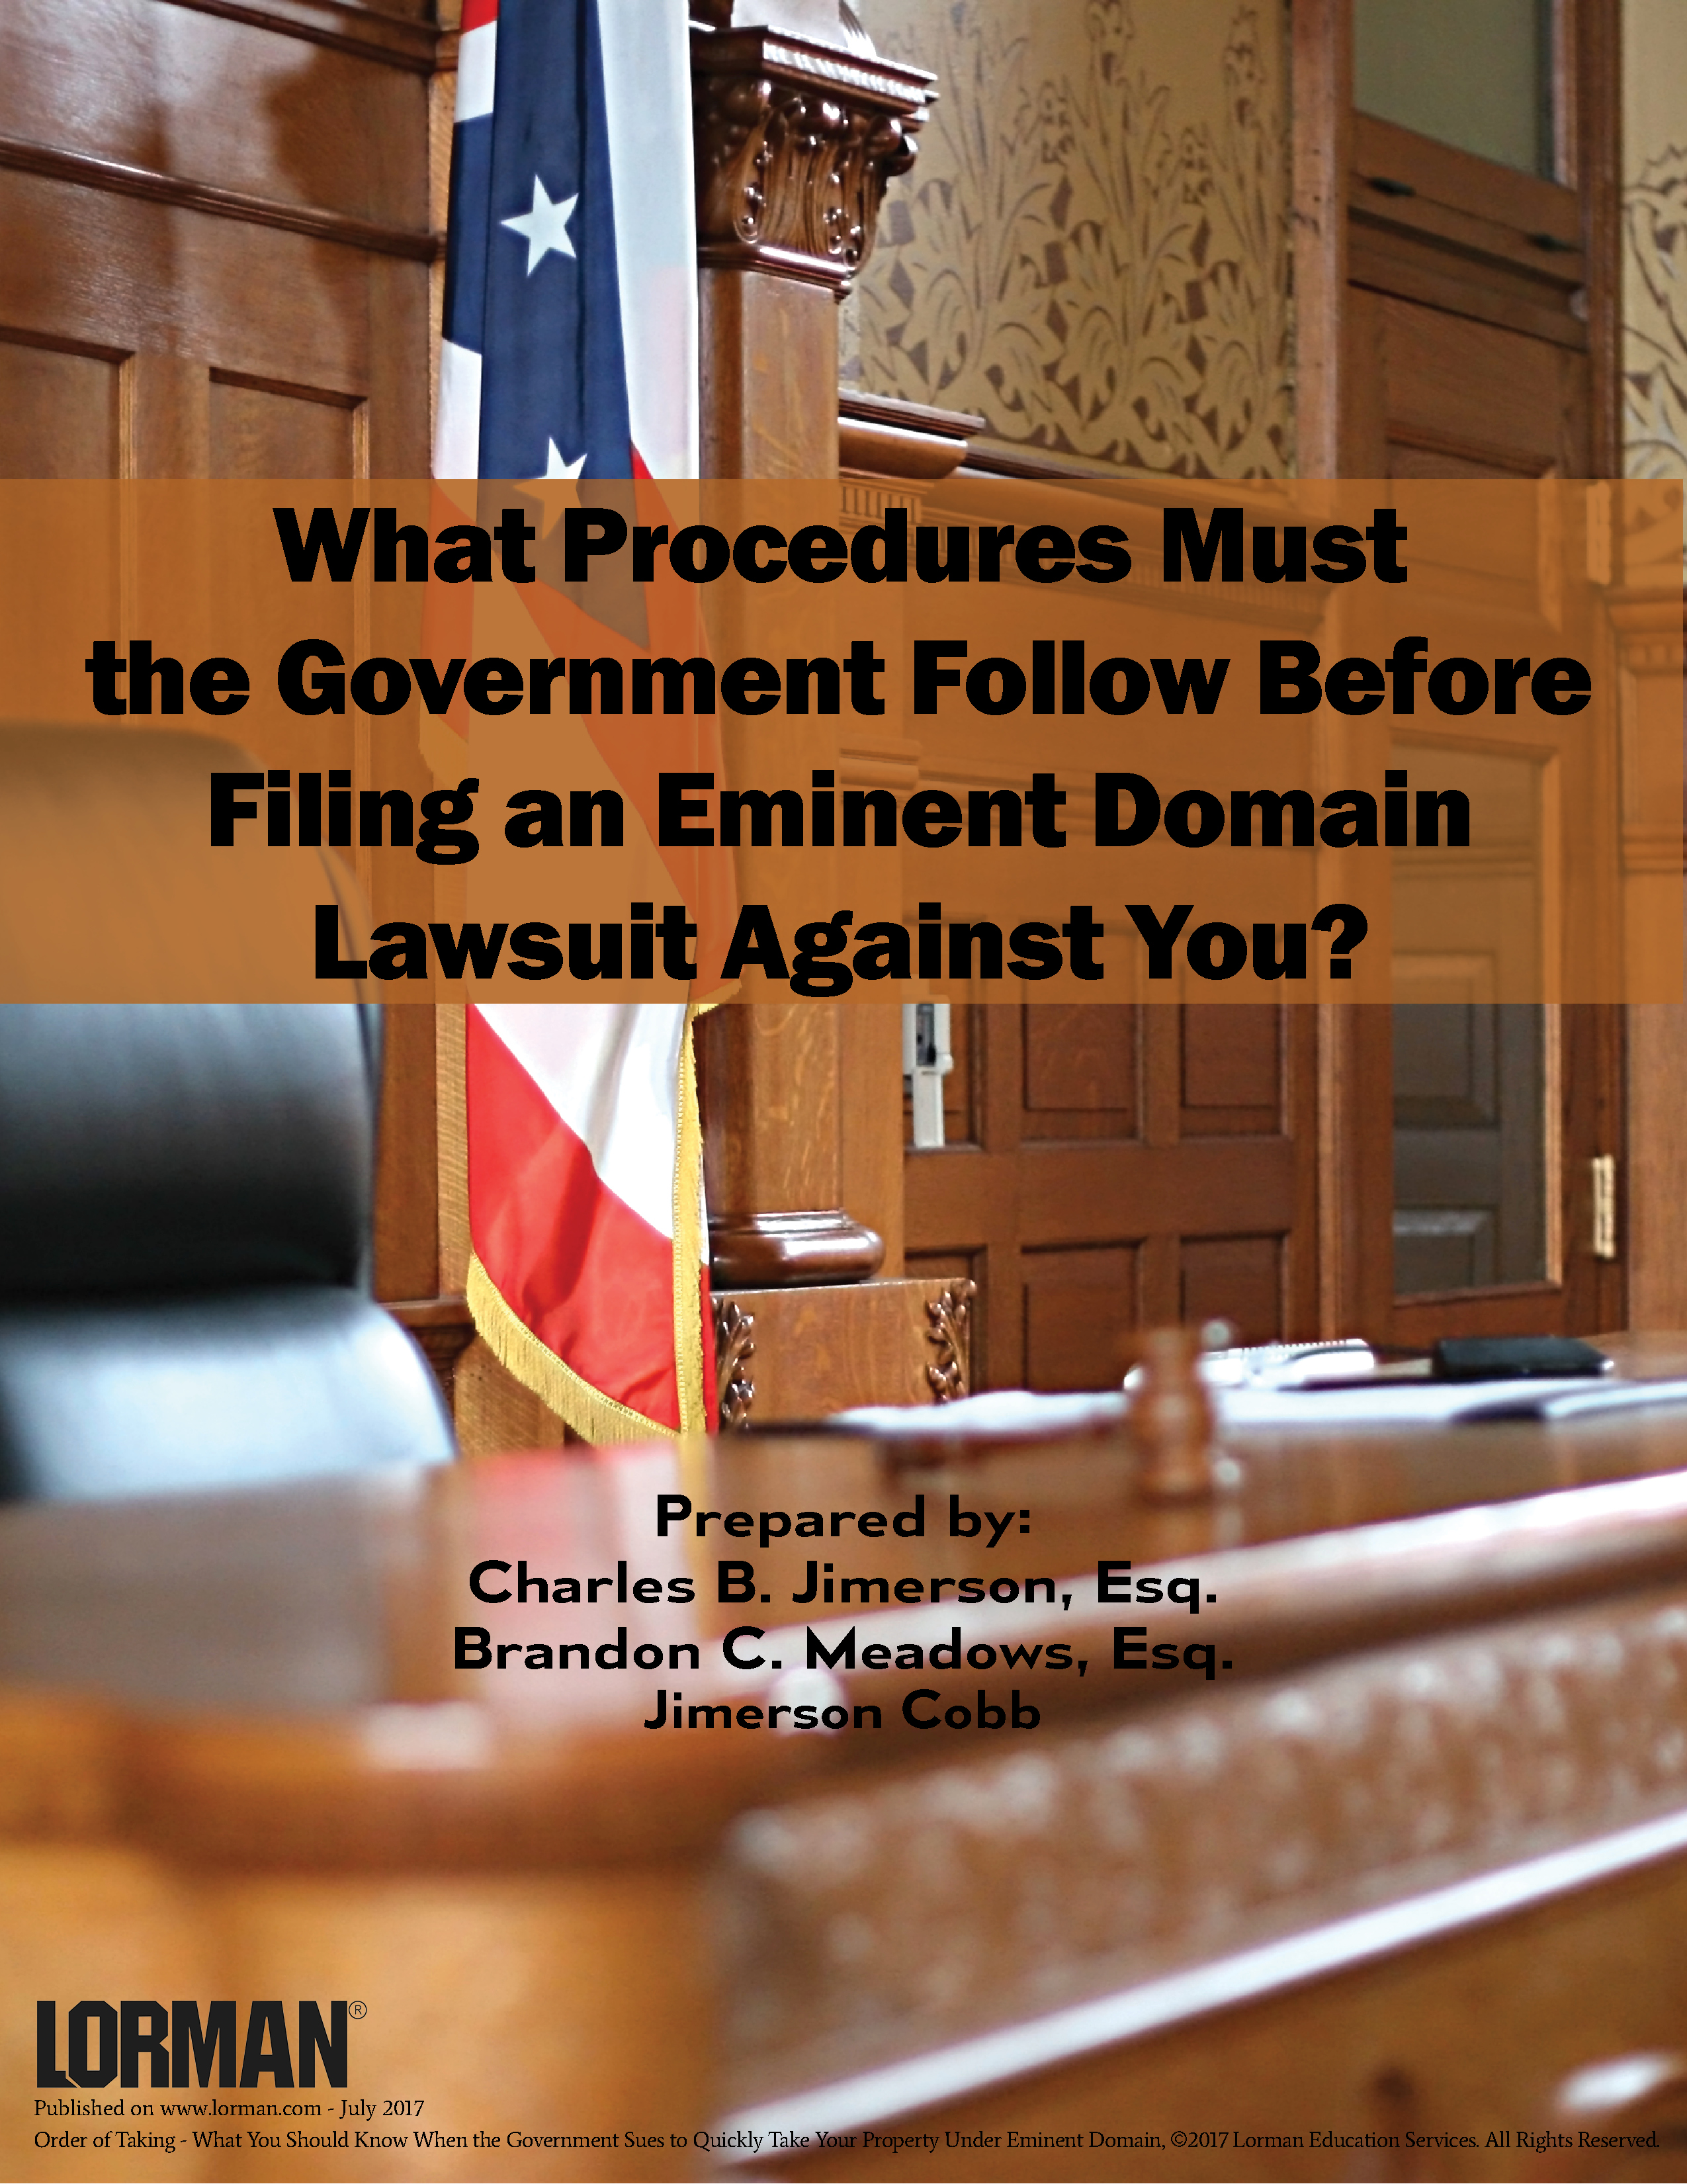 What Procedures Must the Government Follow Before Filing an Eminent Domain Lawsuit Against You?